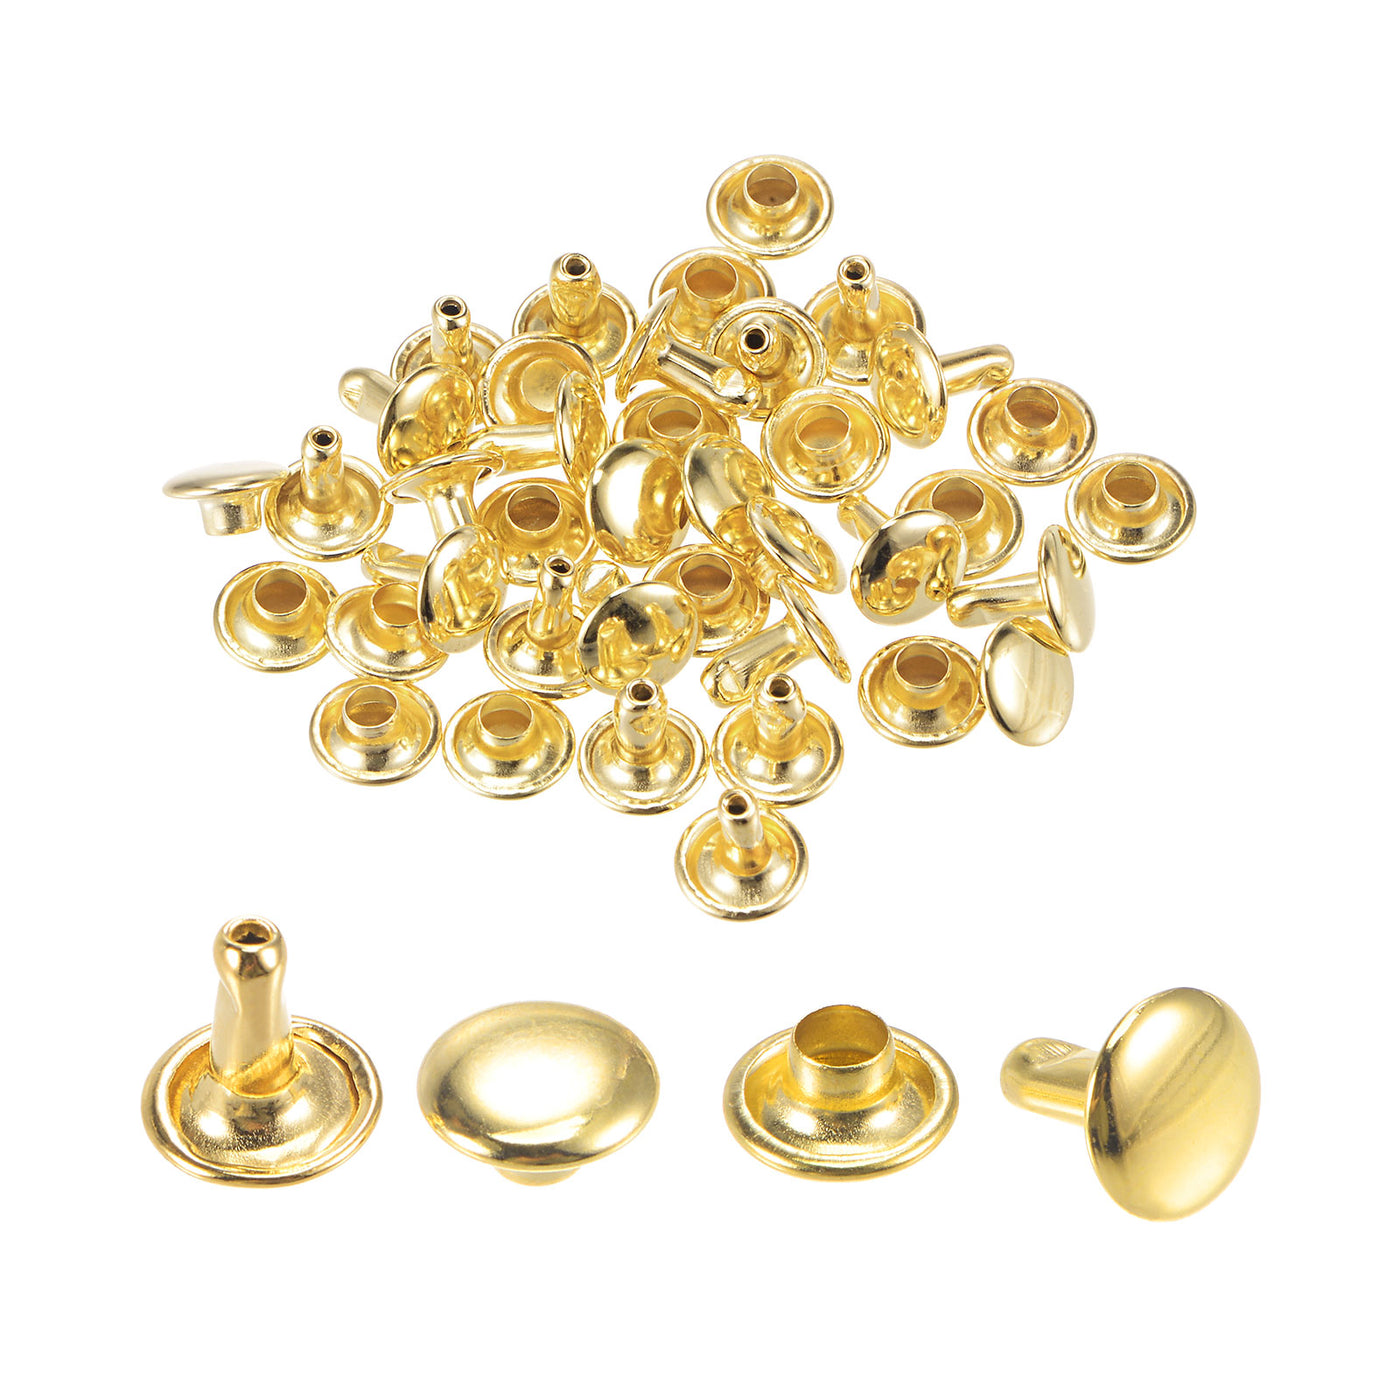 uxcell Uxcell 20 Sets Leather Rivets Gold Tone 8mm Double Cap Brass Rivet Leather Studs